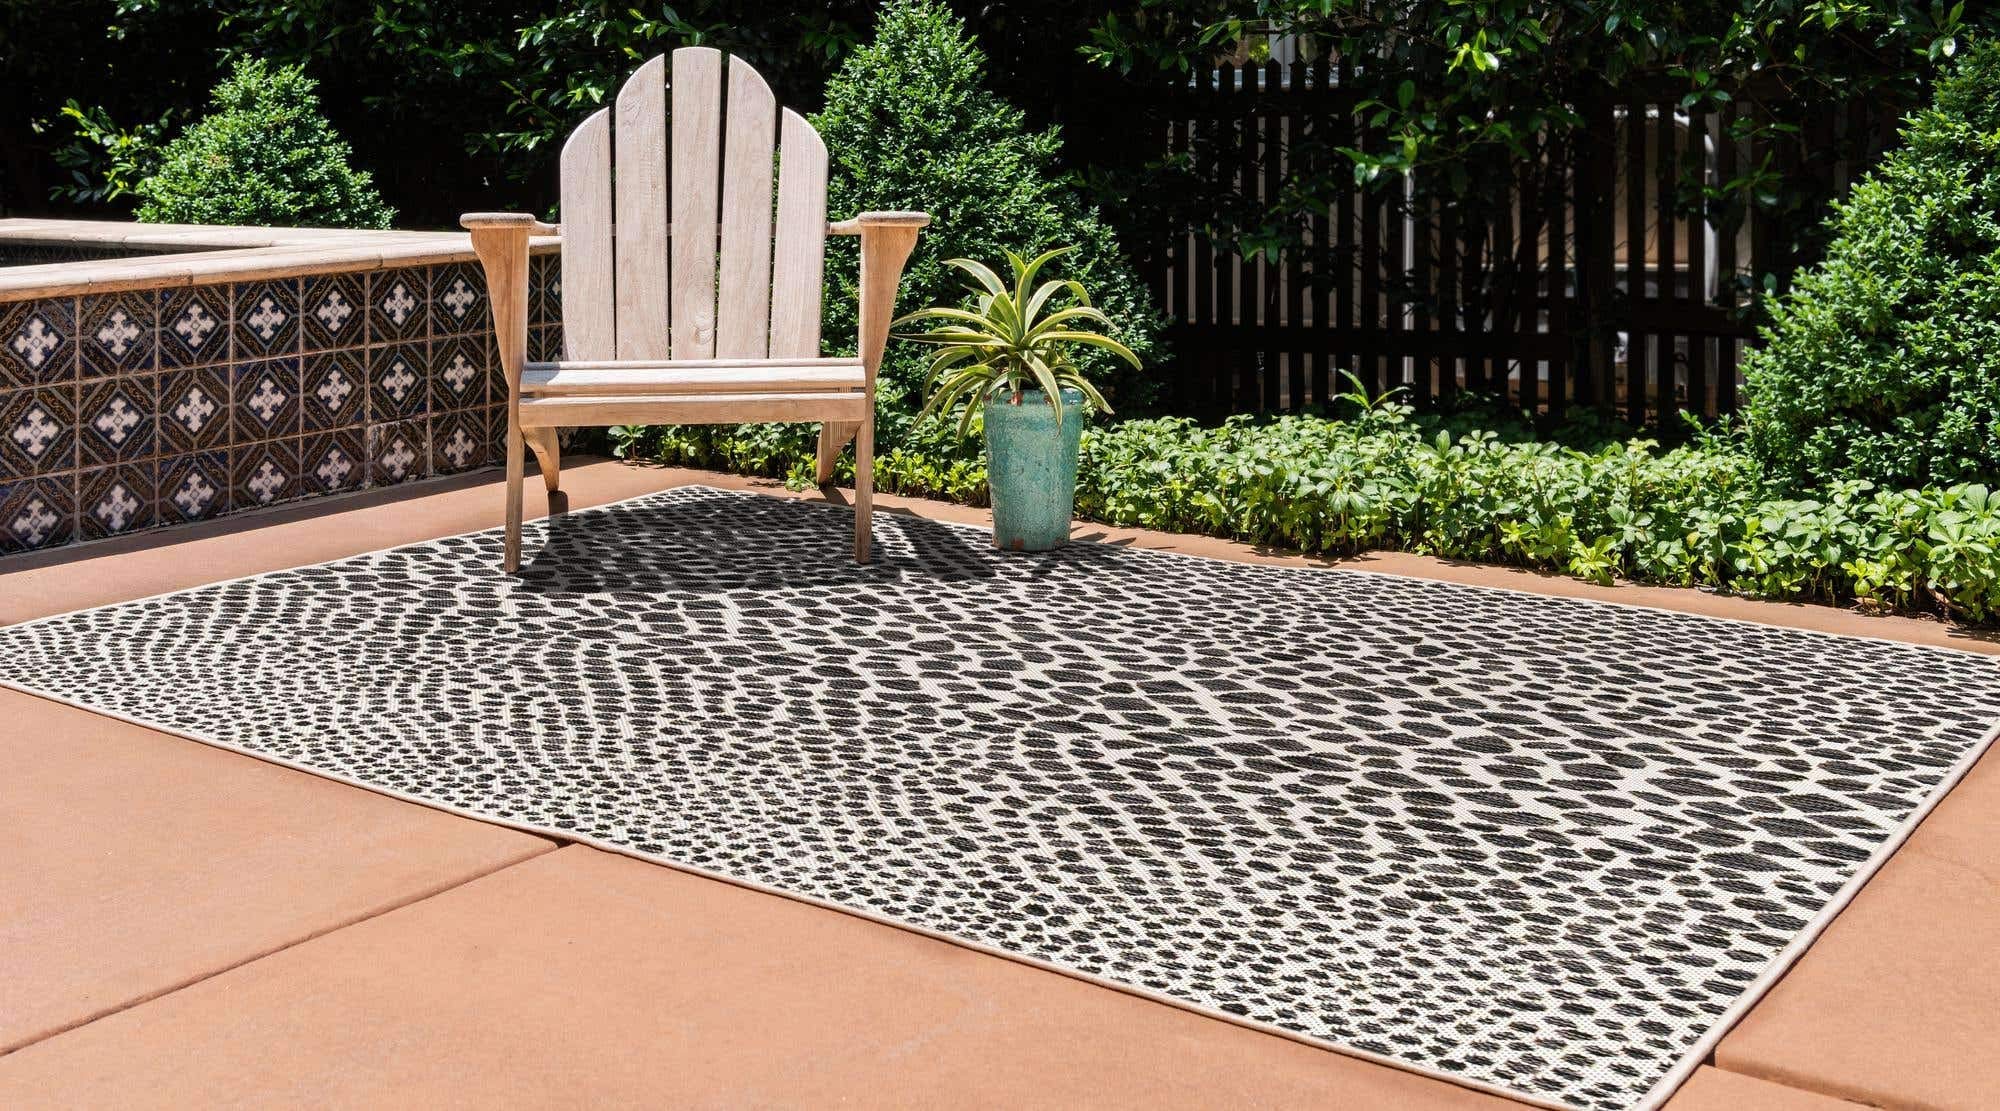 Unique Loom Outdoor Collection Area Rug - Cape Town (5' 3' x 8' Rectangle, Black/ Ivory)